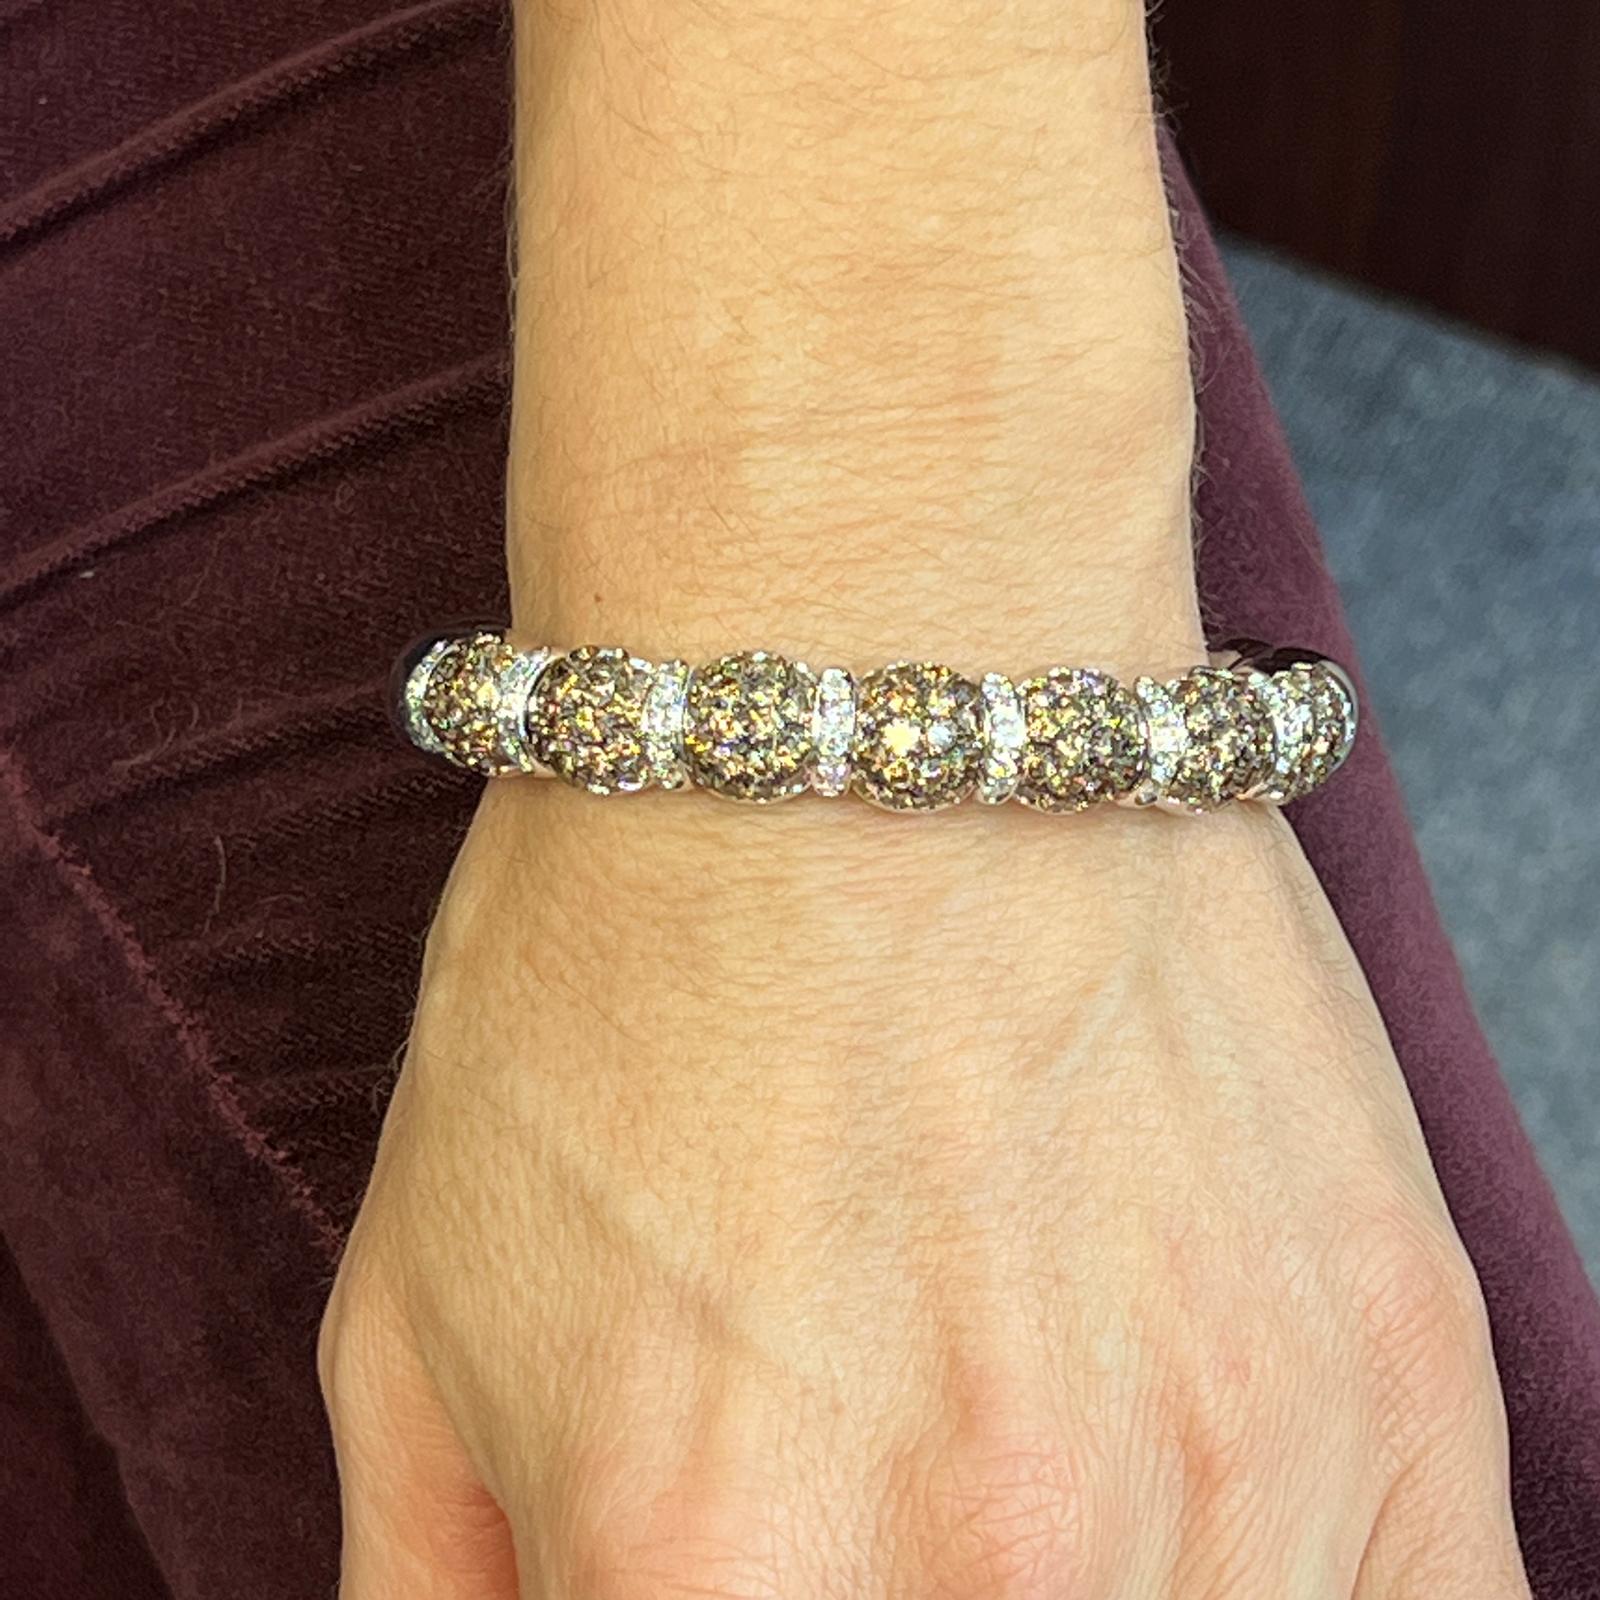 Gorgeous diamond bangle bracelet fashioned in 18 karat white gold. The flexible bangle features round brilliant white and champagne diamonds weighing approximately 8.33 carat total weight. The white diamonds are graded G-H color and VS clarity, and